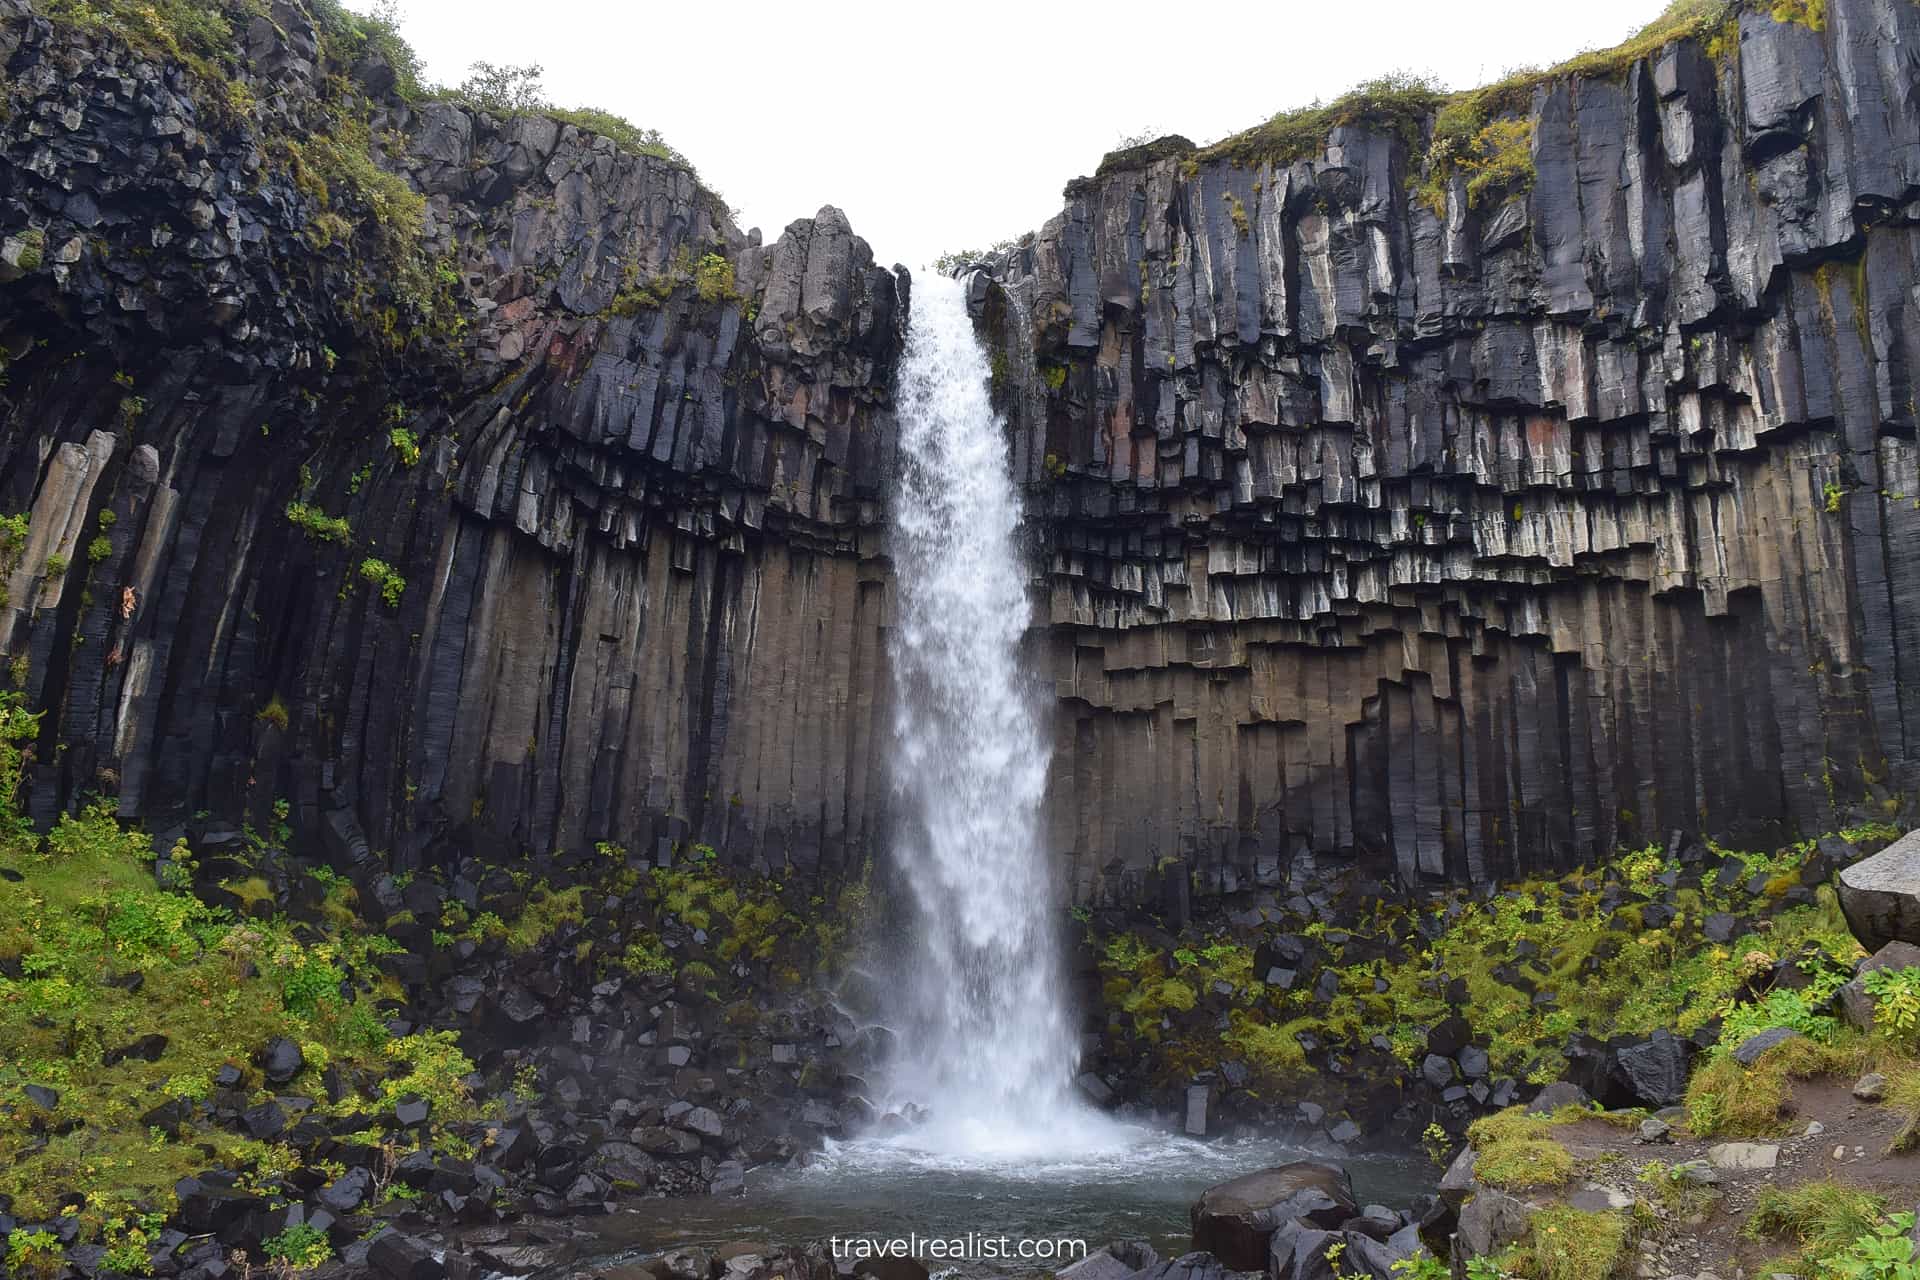 Close up view of Svartifoss waterfall in Skaftafell National Park in Iceland